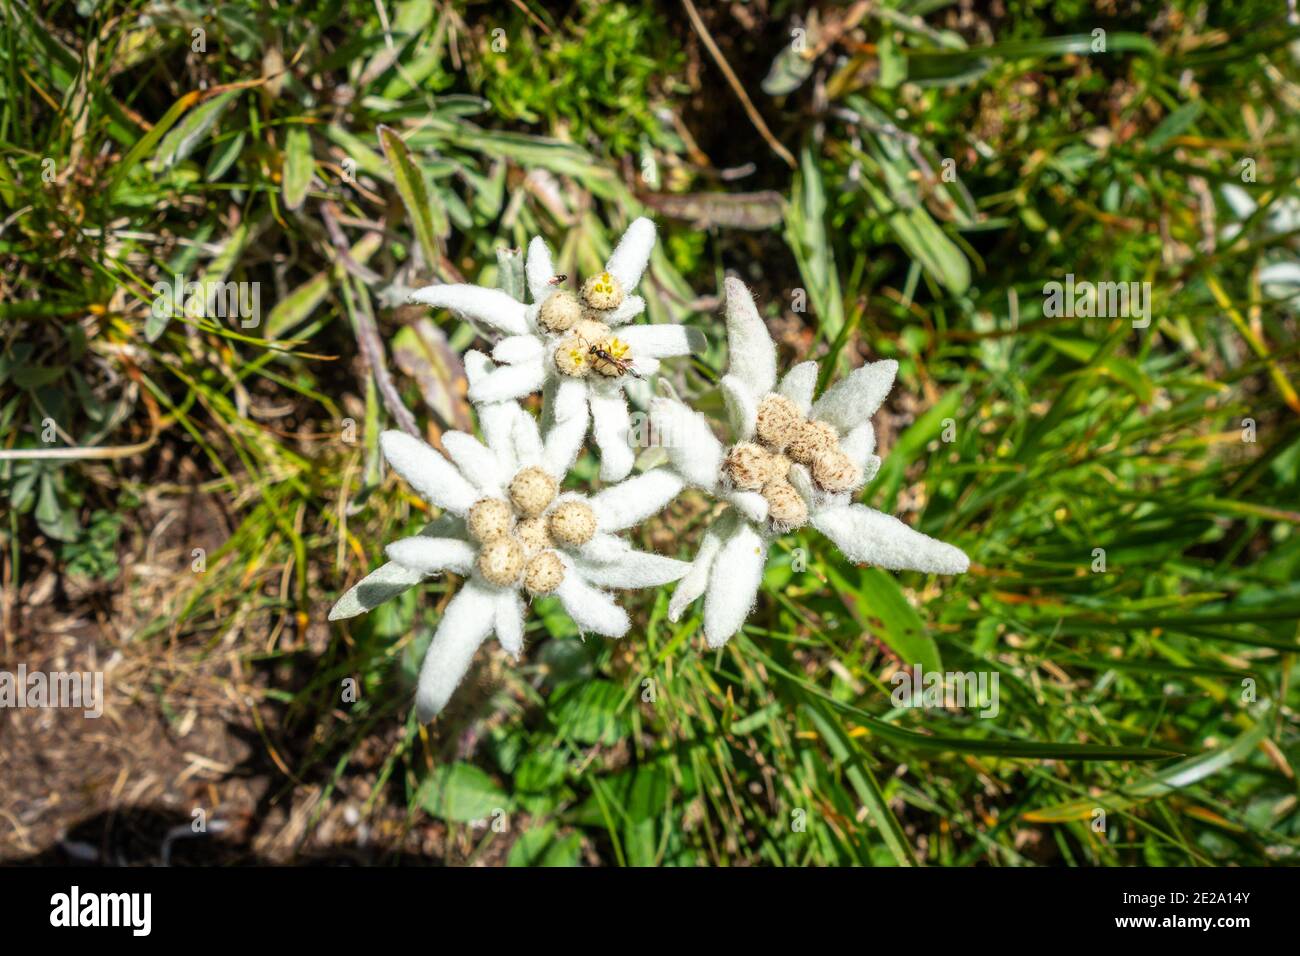 Edelweiss flowers close up view in Vanoise national Park, France Stock Photo